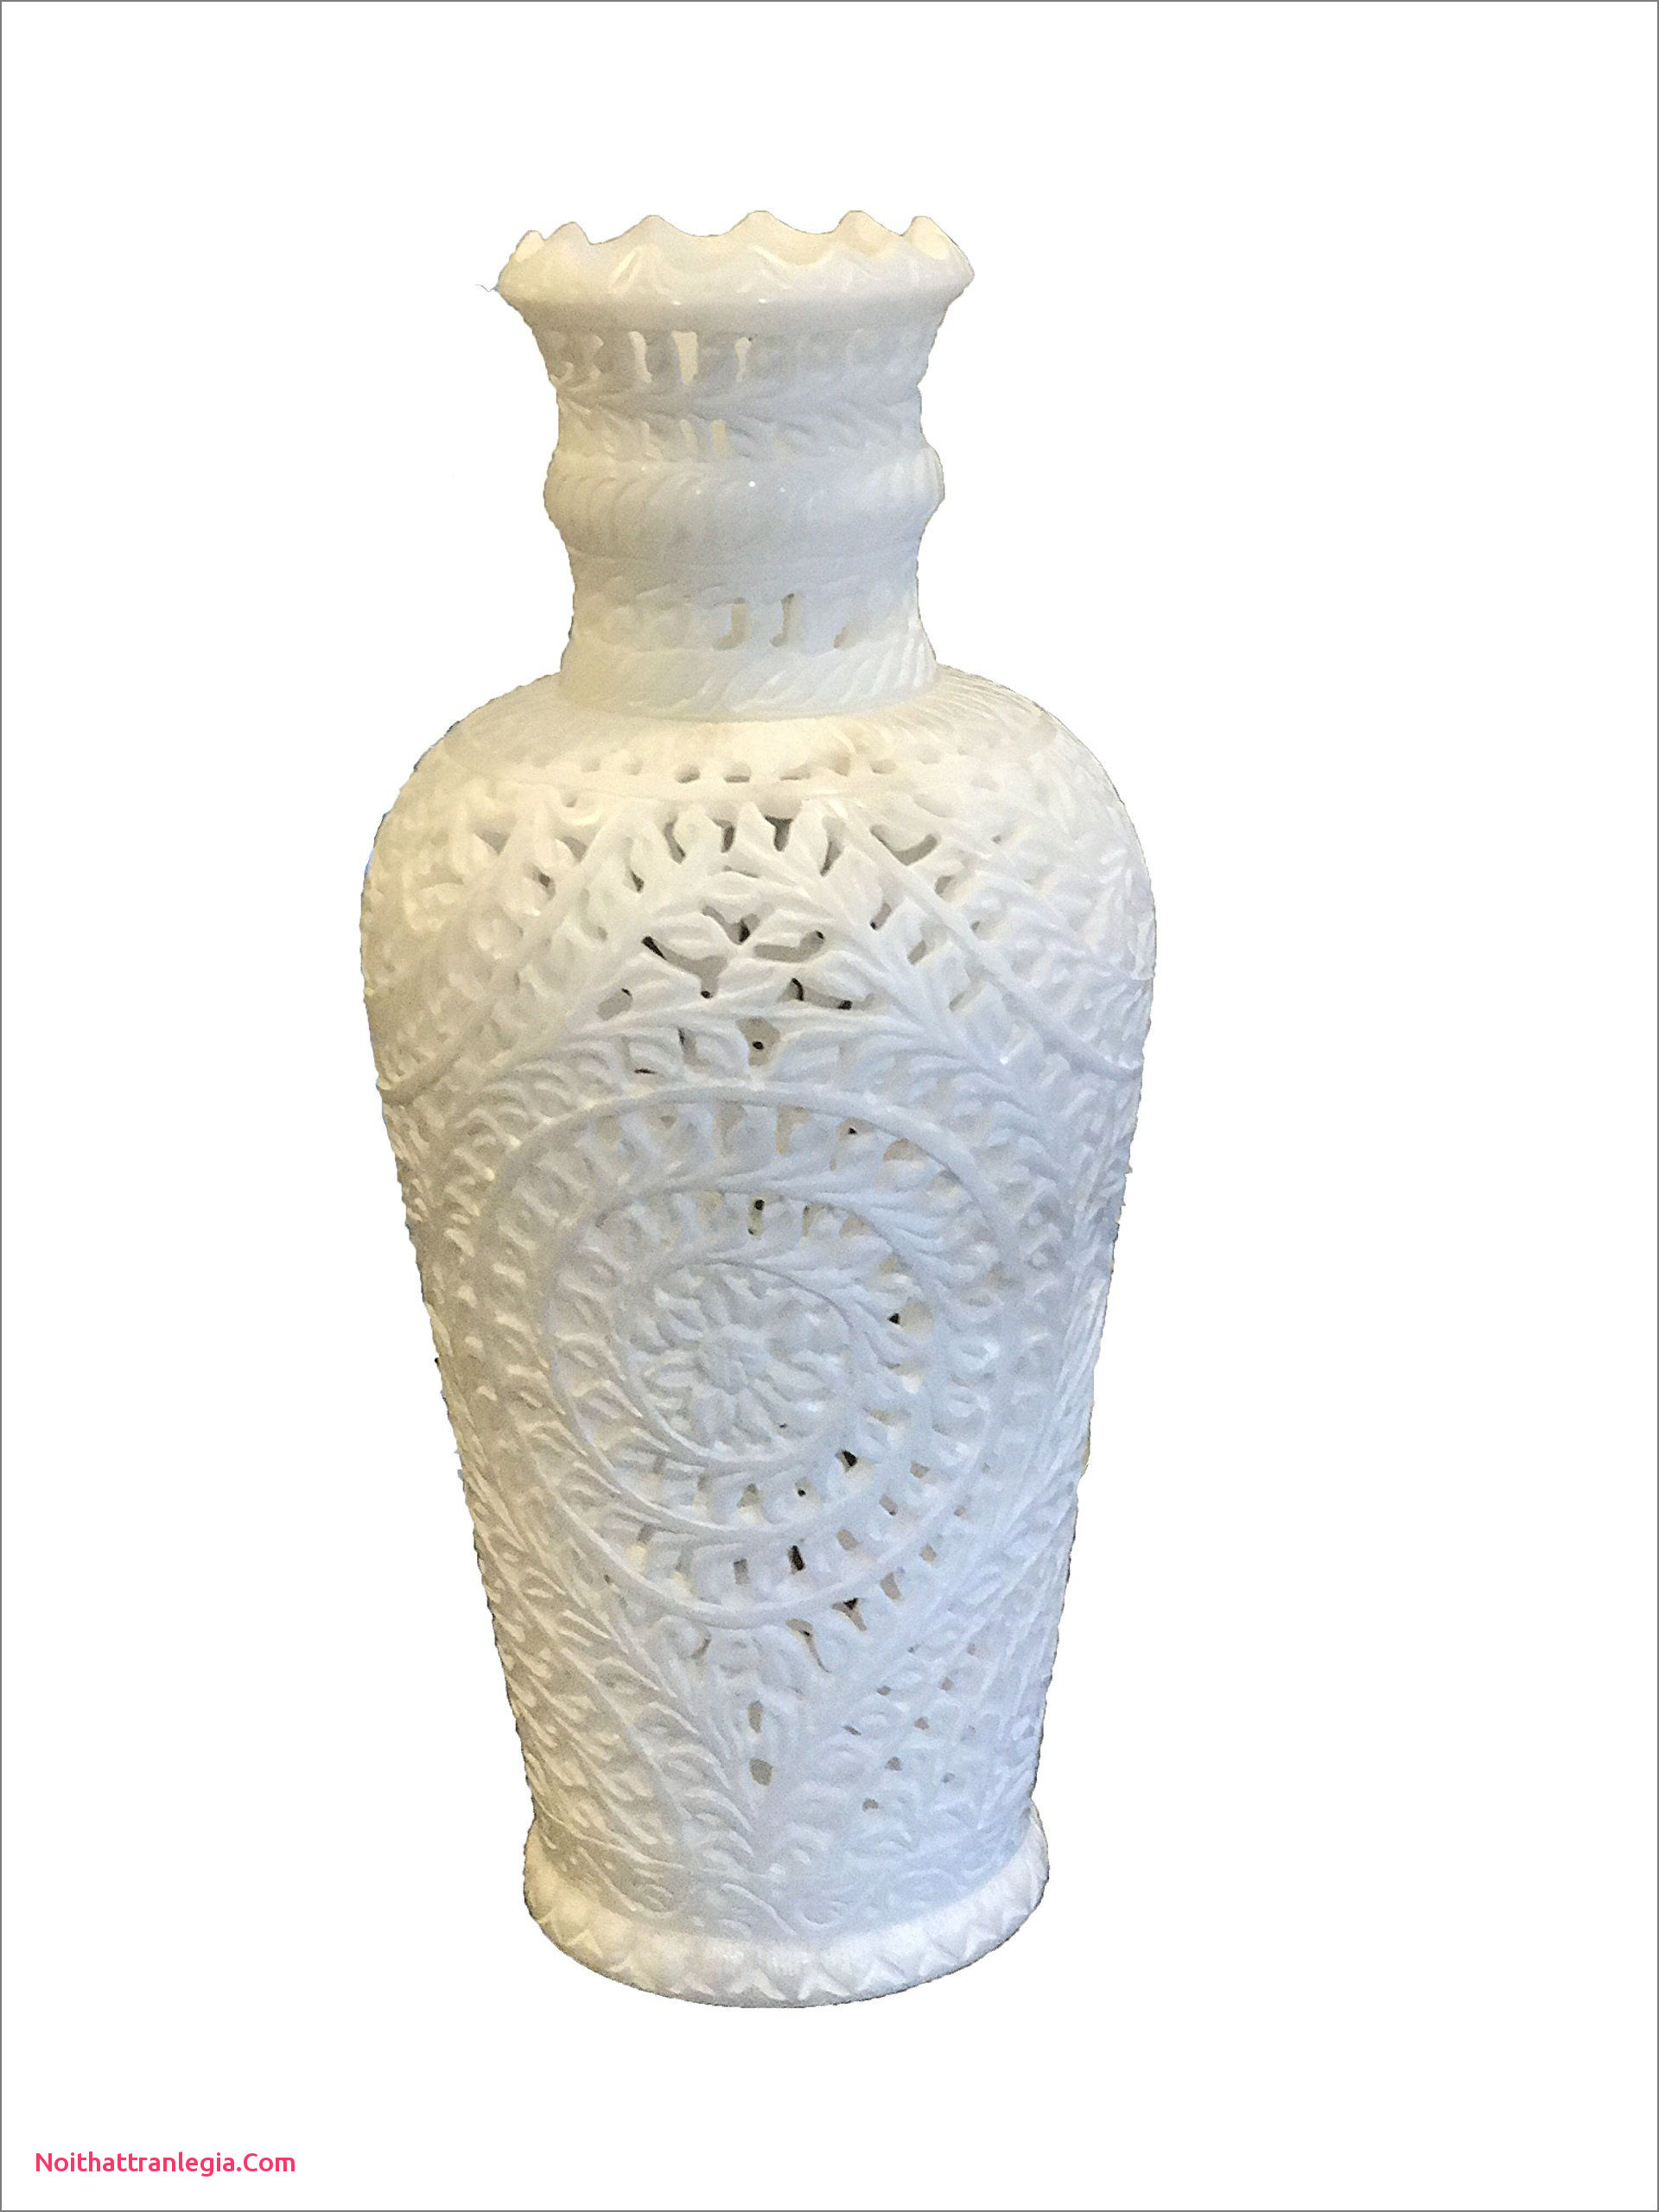 23 attractive Large Glass Urn Vase 2022 free download large glass urn vase of 20 how to clean flower vases noithattranlegia vases design throughout white marble flower vase handcrafted stone decorative wedding diy vases handcrafted by artisans 